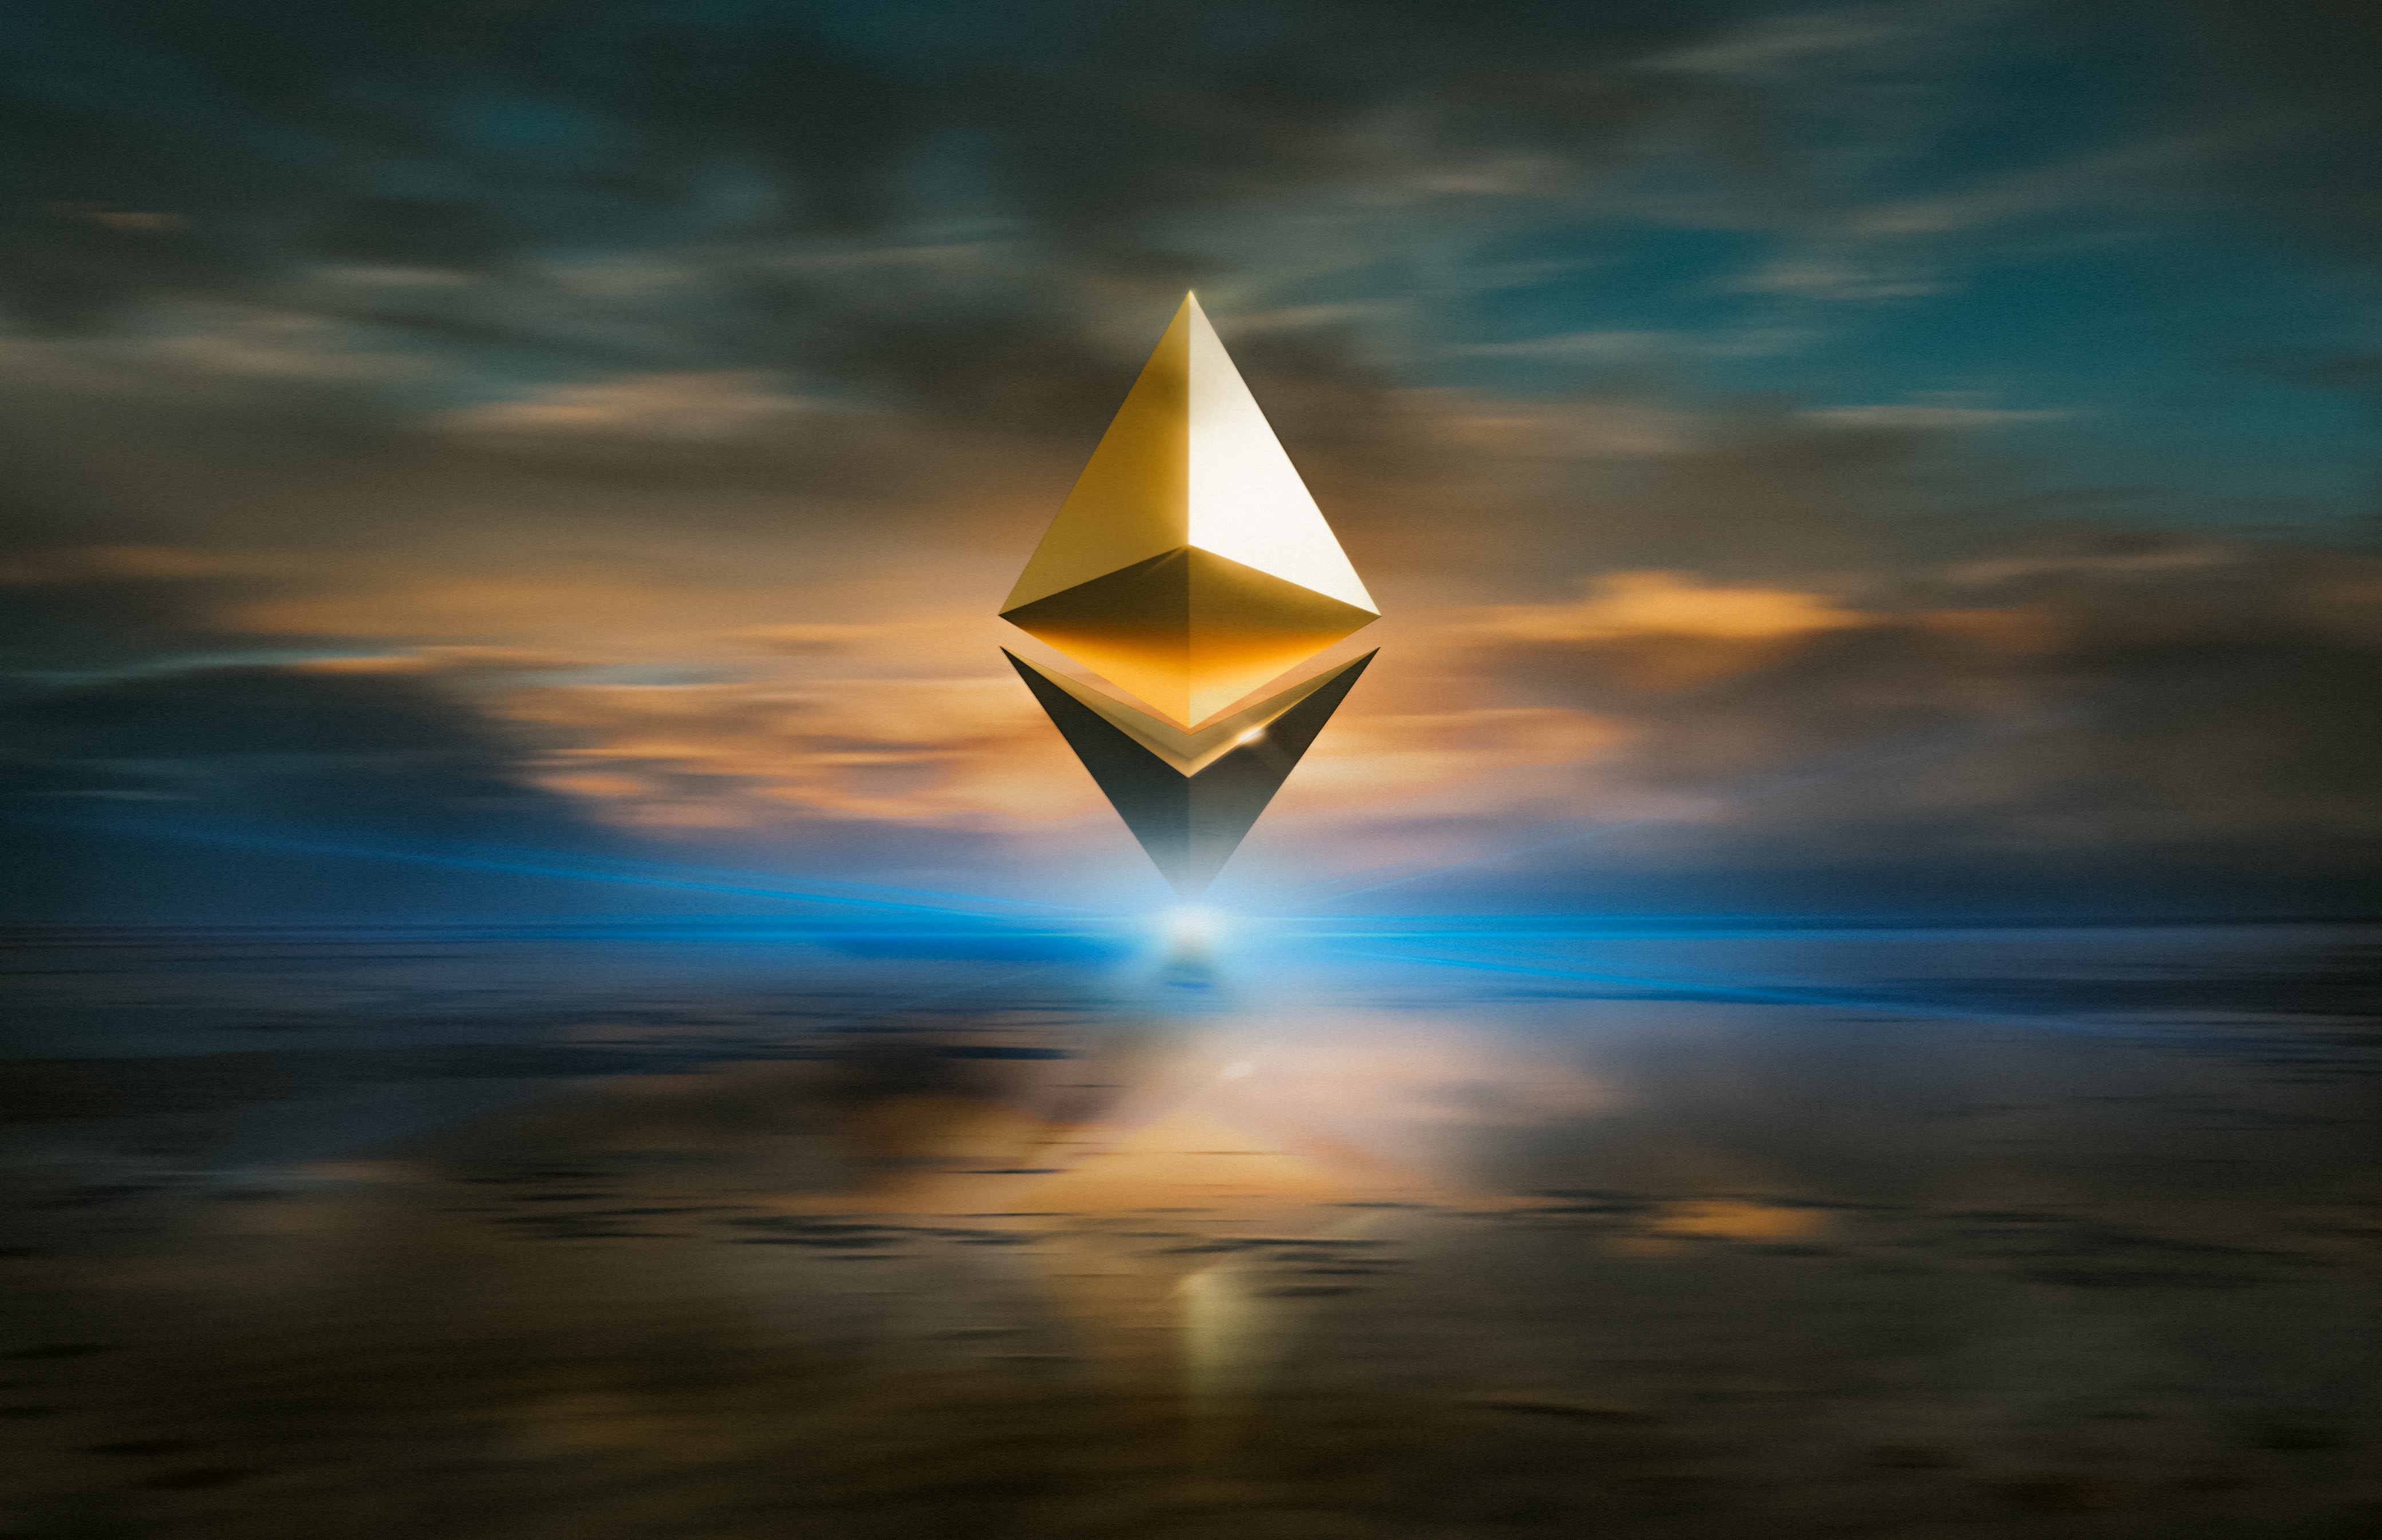 Ether Price Swings Upward After Ethereum Upgrade, but What About the Future?